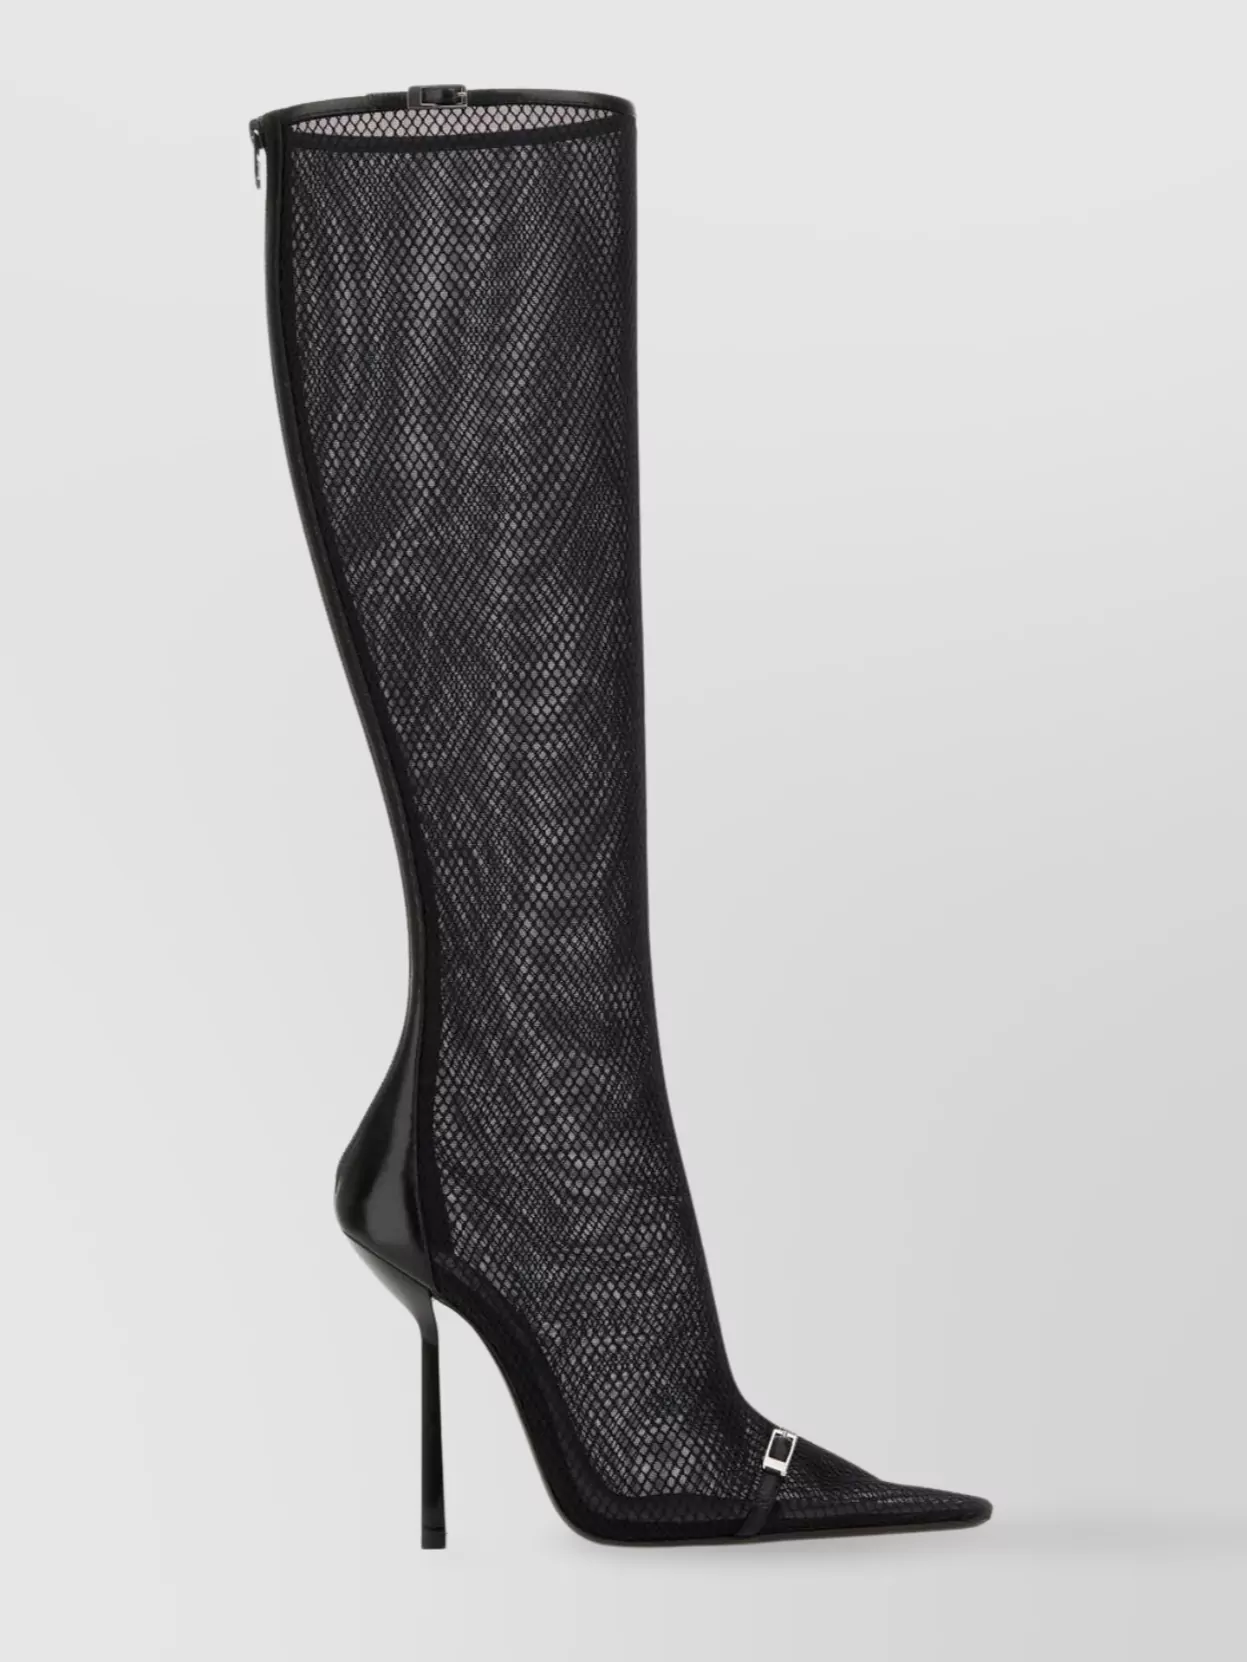 SAINT LAURENT MESH OXALIS BOOTS WITH POINTED TOE AND STILETTO HEEL